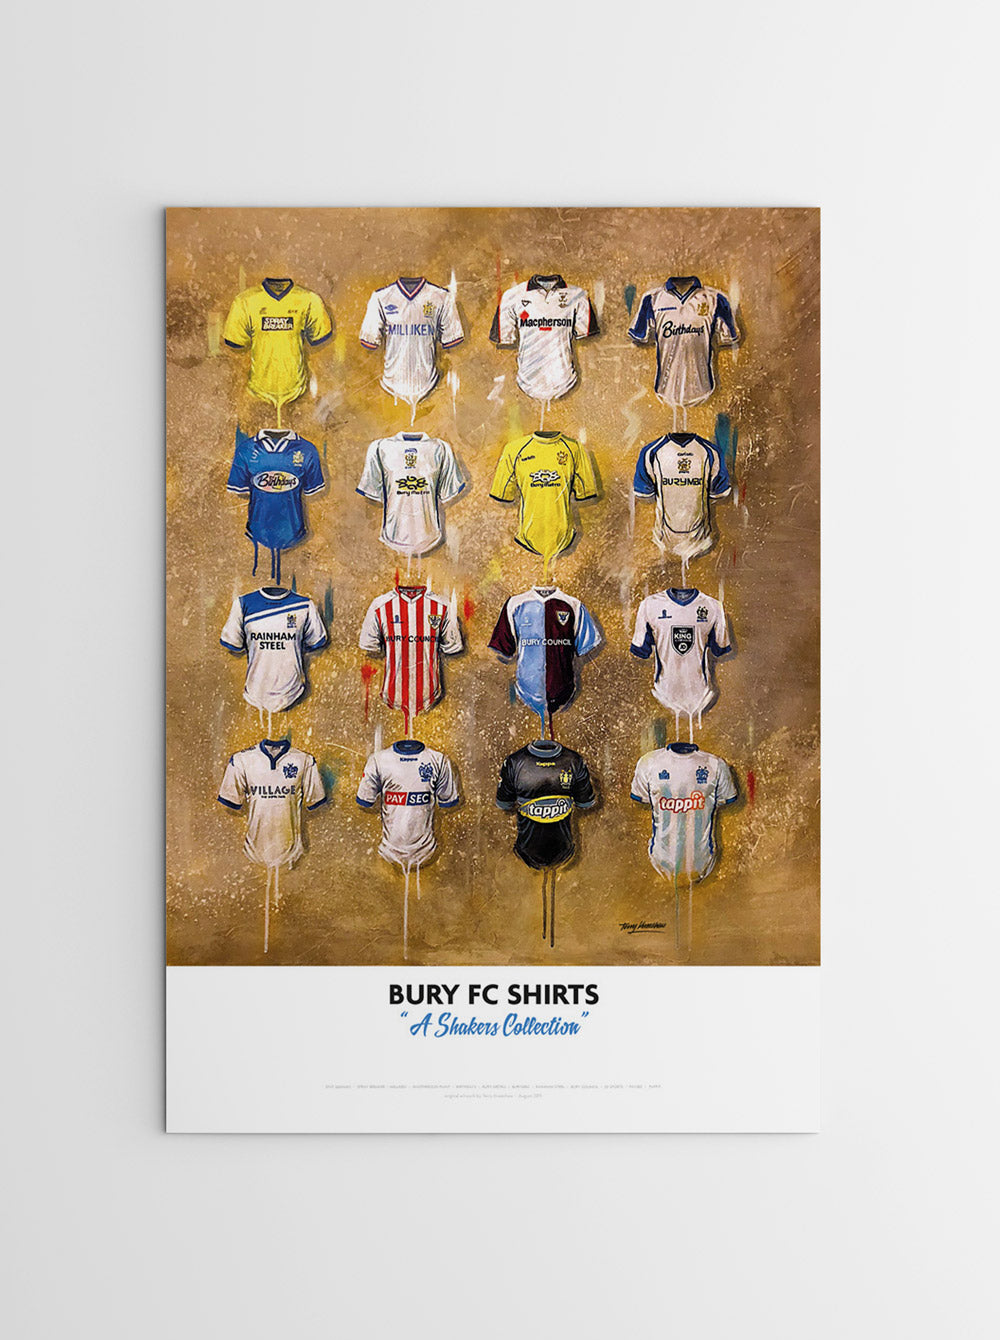 Bury FC Shirts - A Shakers Collection